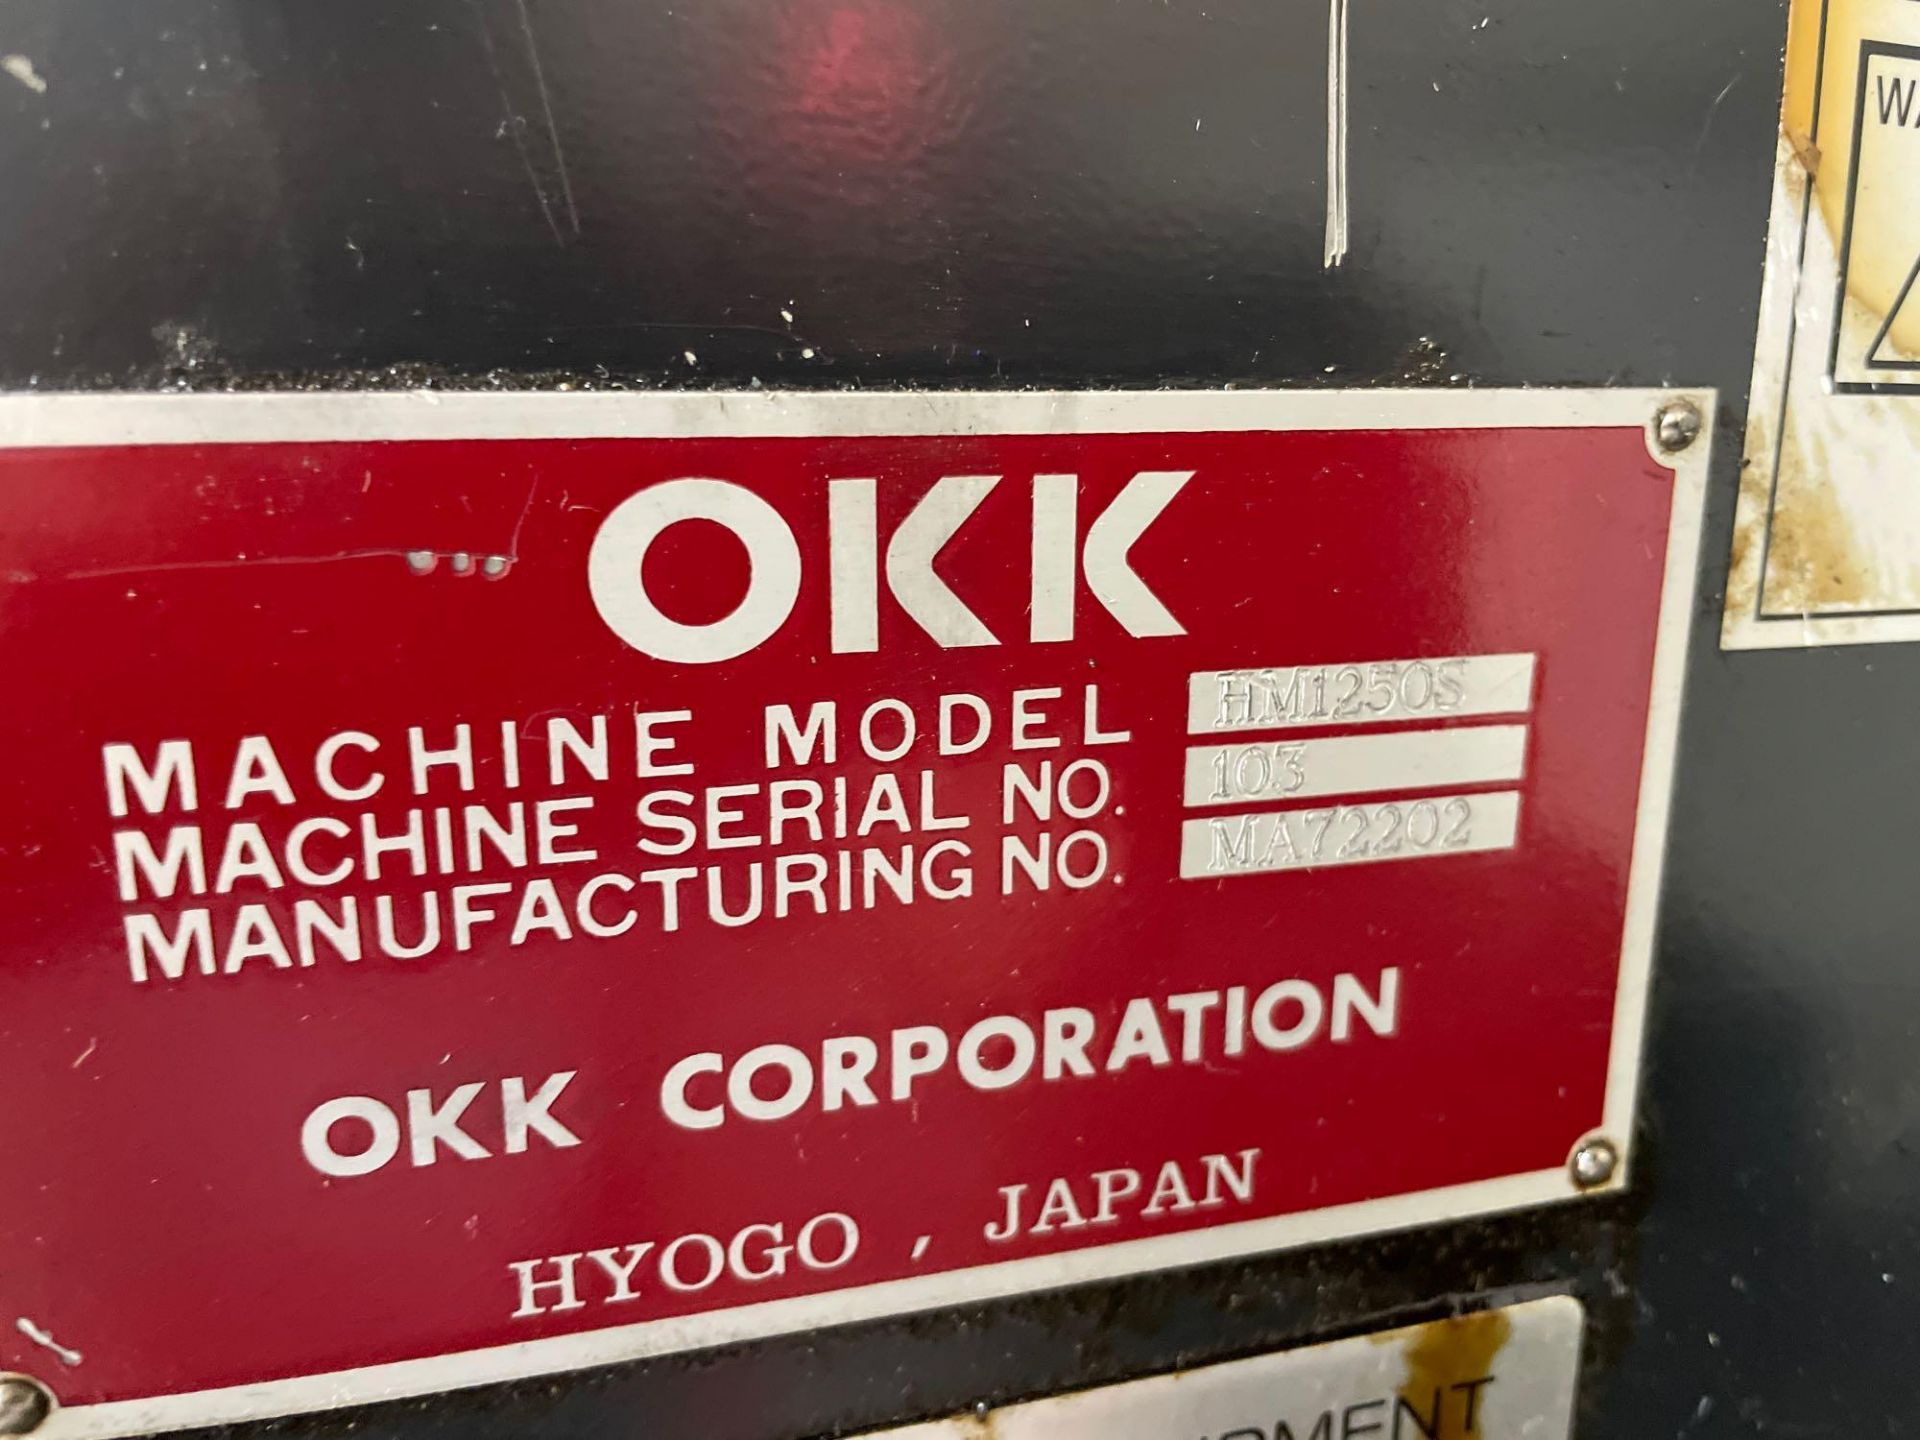 OKK HM1250S 4-Axis, Fanuc 310iS Model A ctrl, 49.2" pllts, 8k RPM, CT50, 80 ATC, CTS, s/n 103 - Image 13 of 18